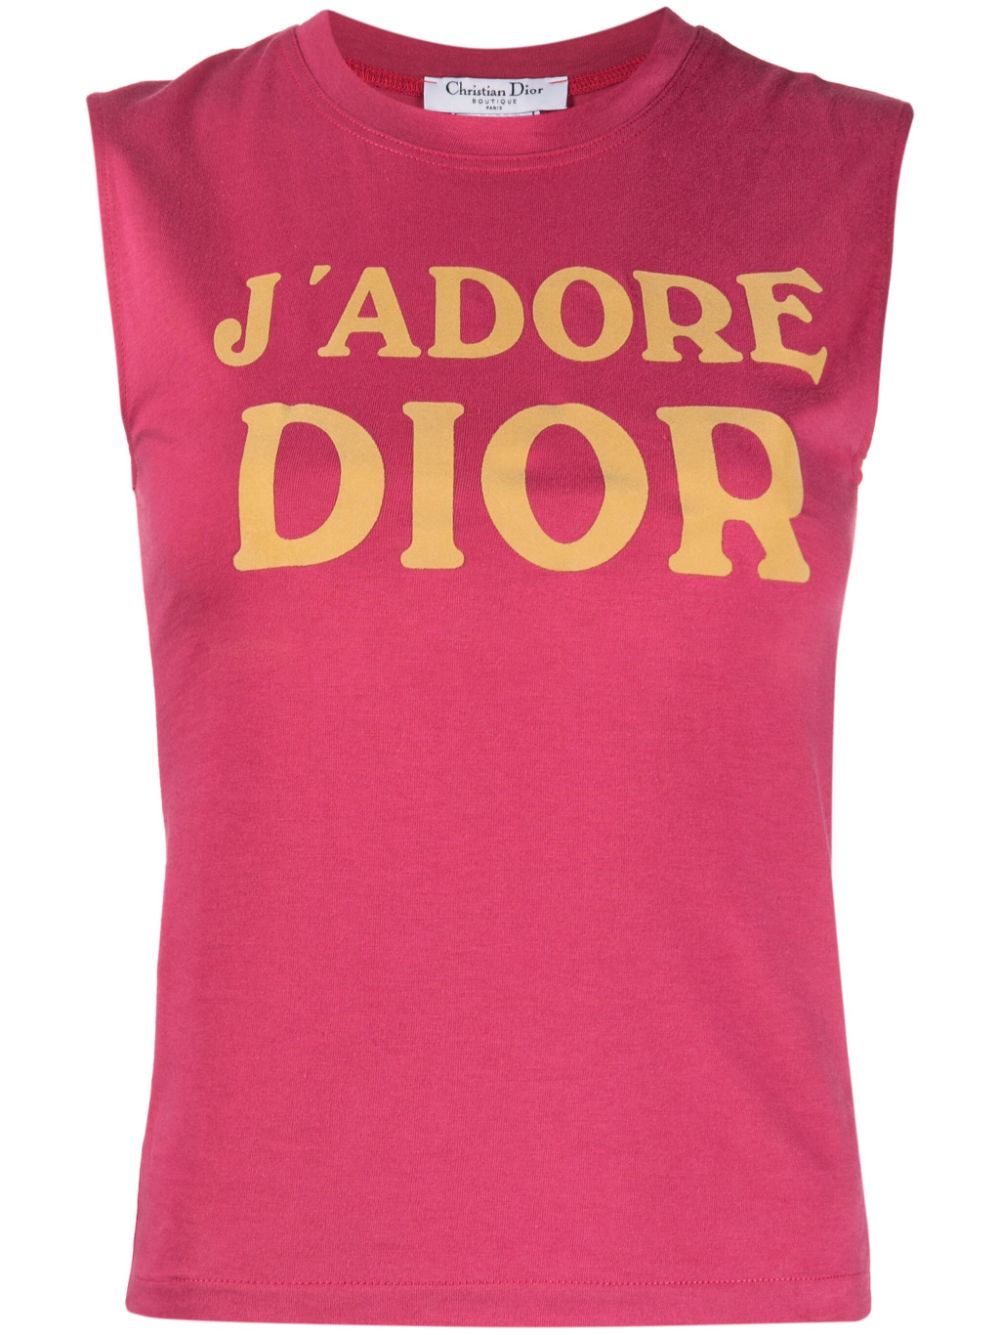 Image 1 of Christian Dior Pre-Owned J'Adore Dior 棉上衣（2002年典藏款）